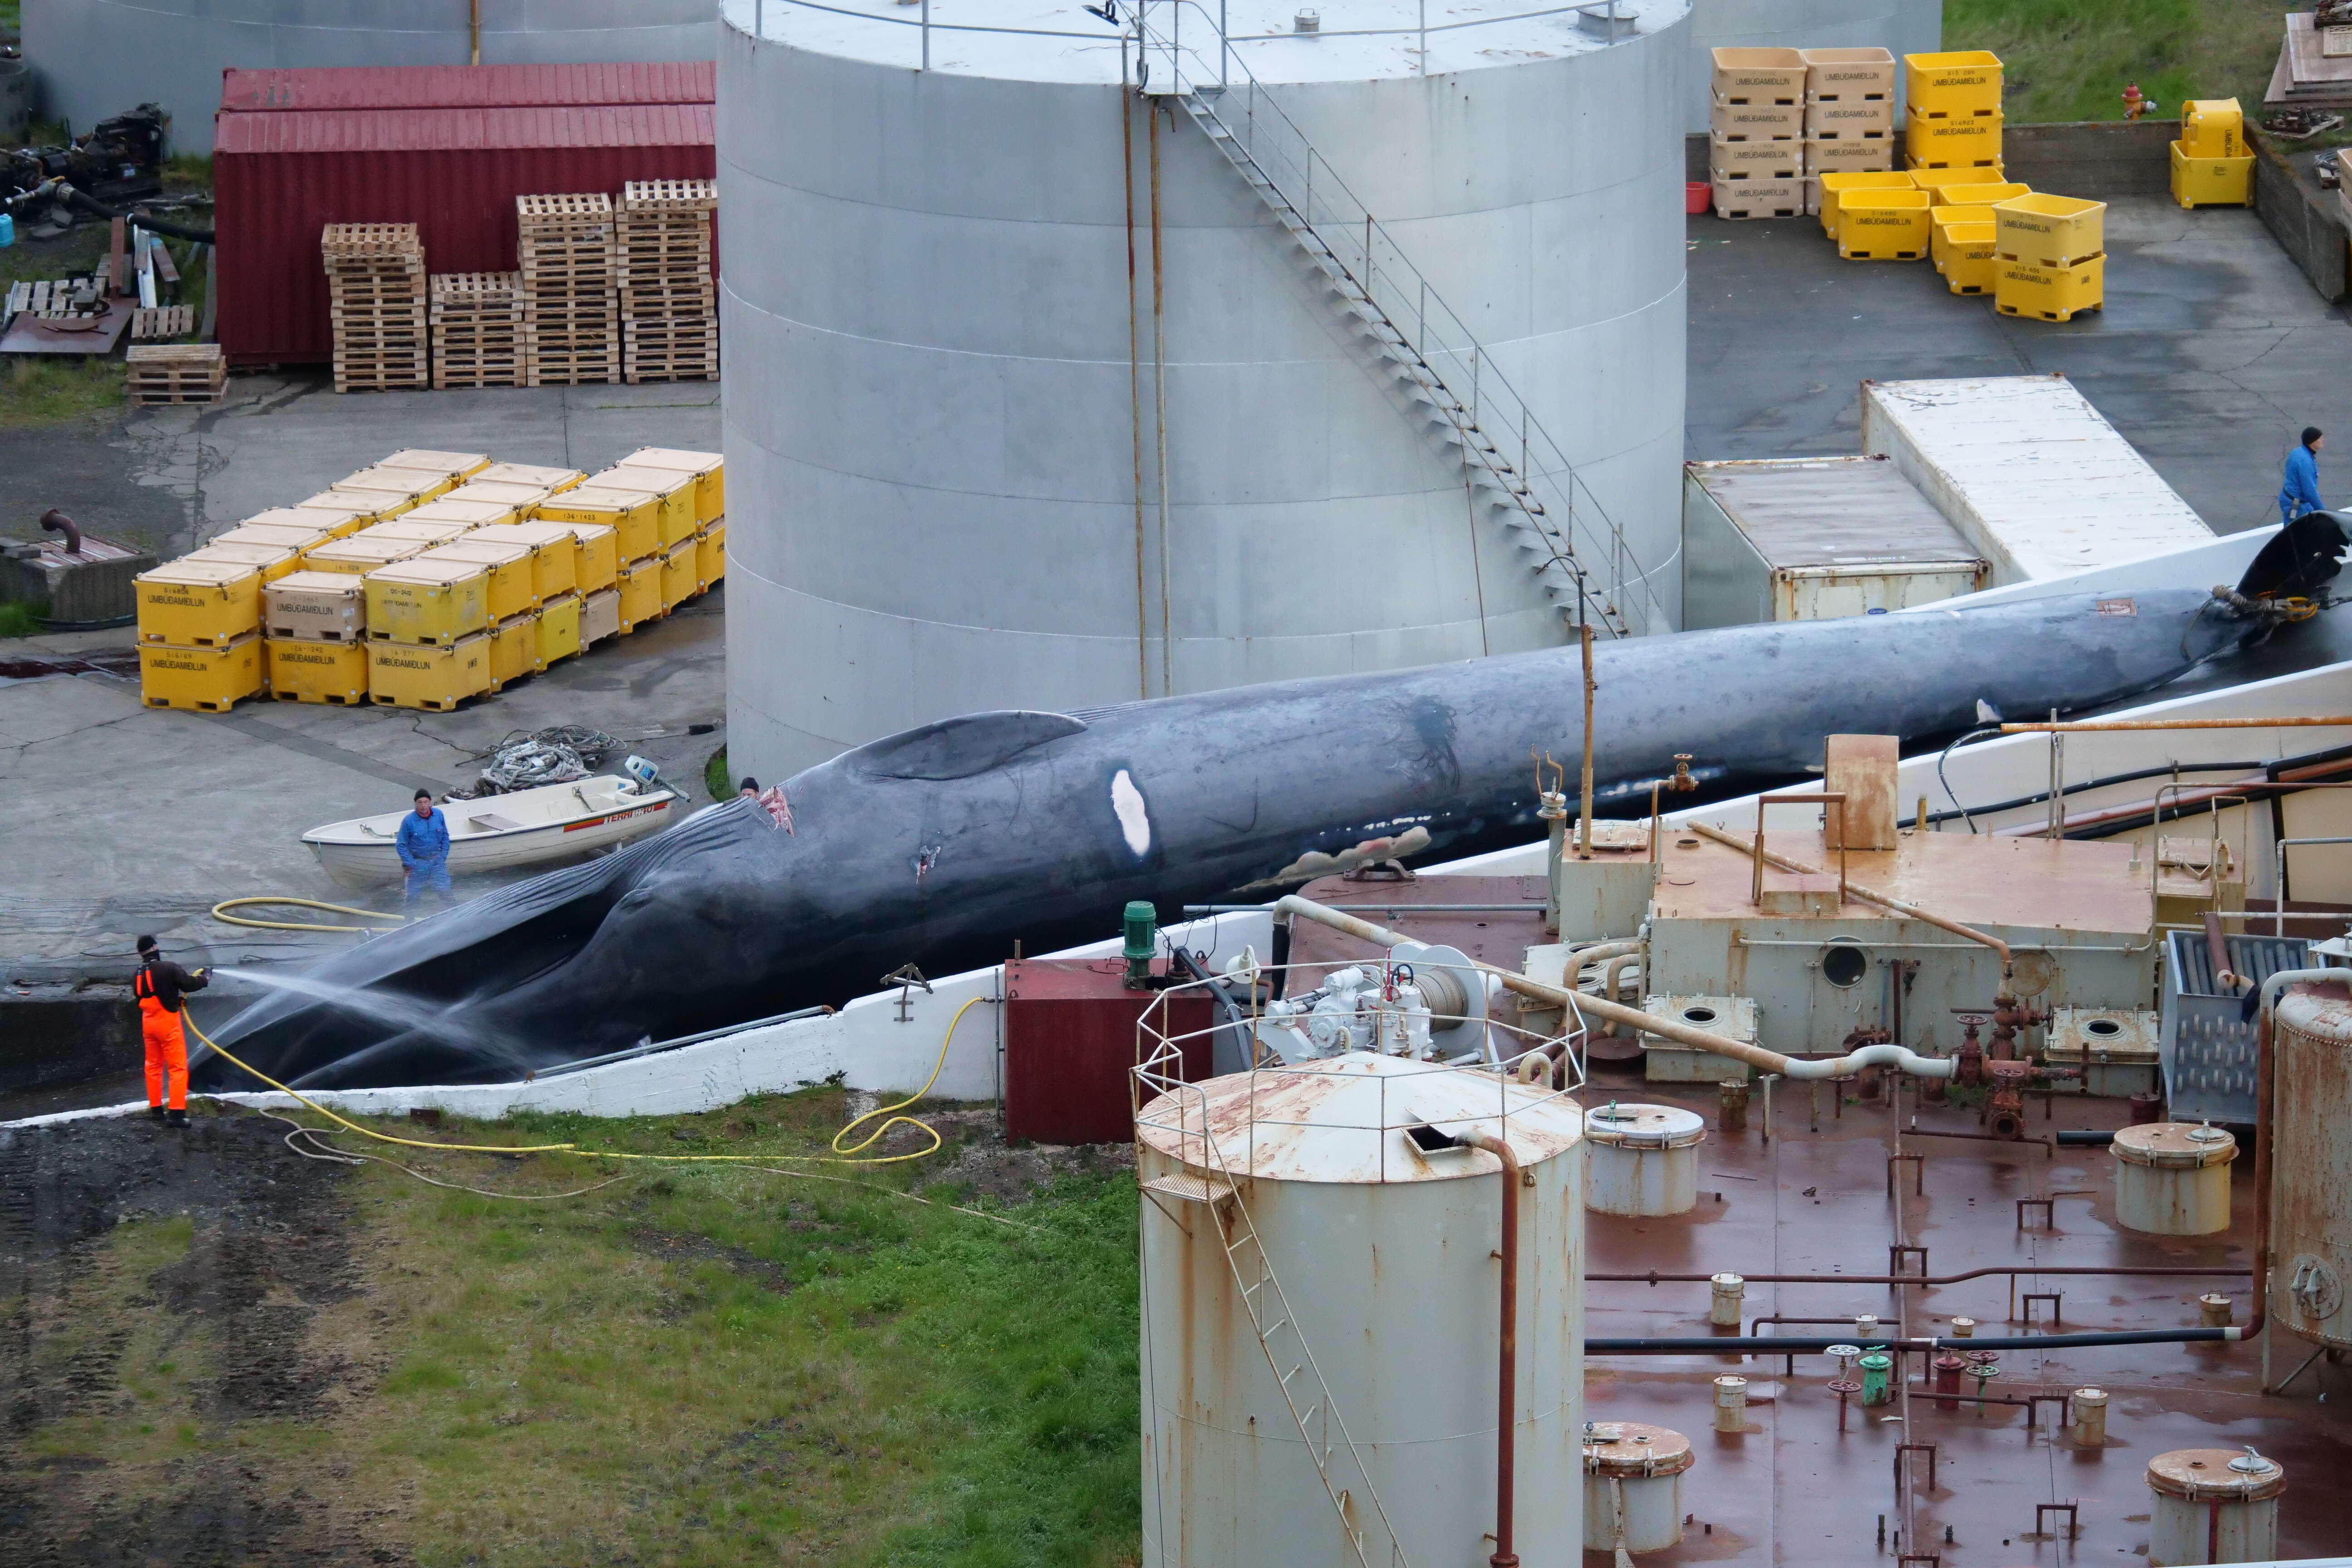 Whale being pulled up slipway of whaling station